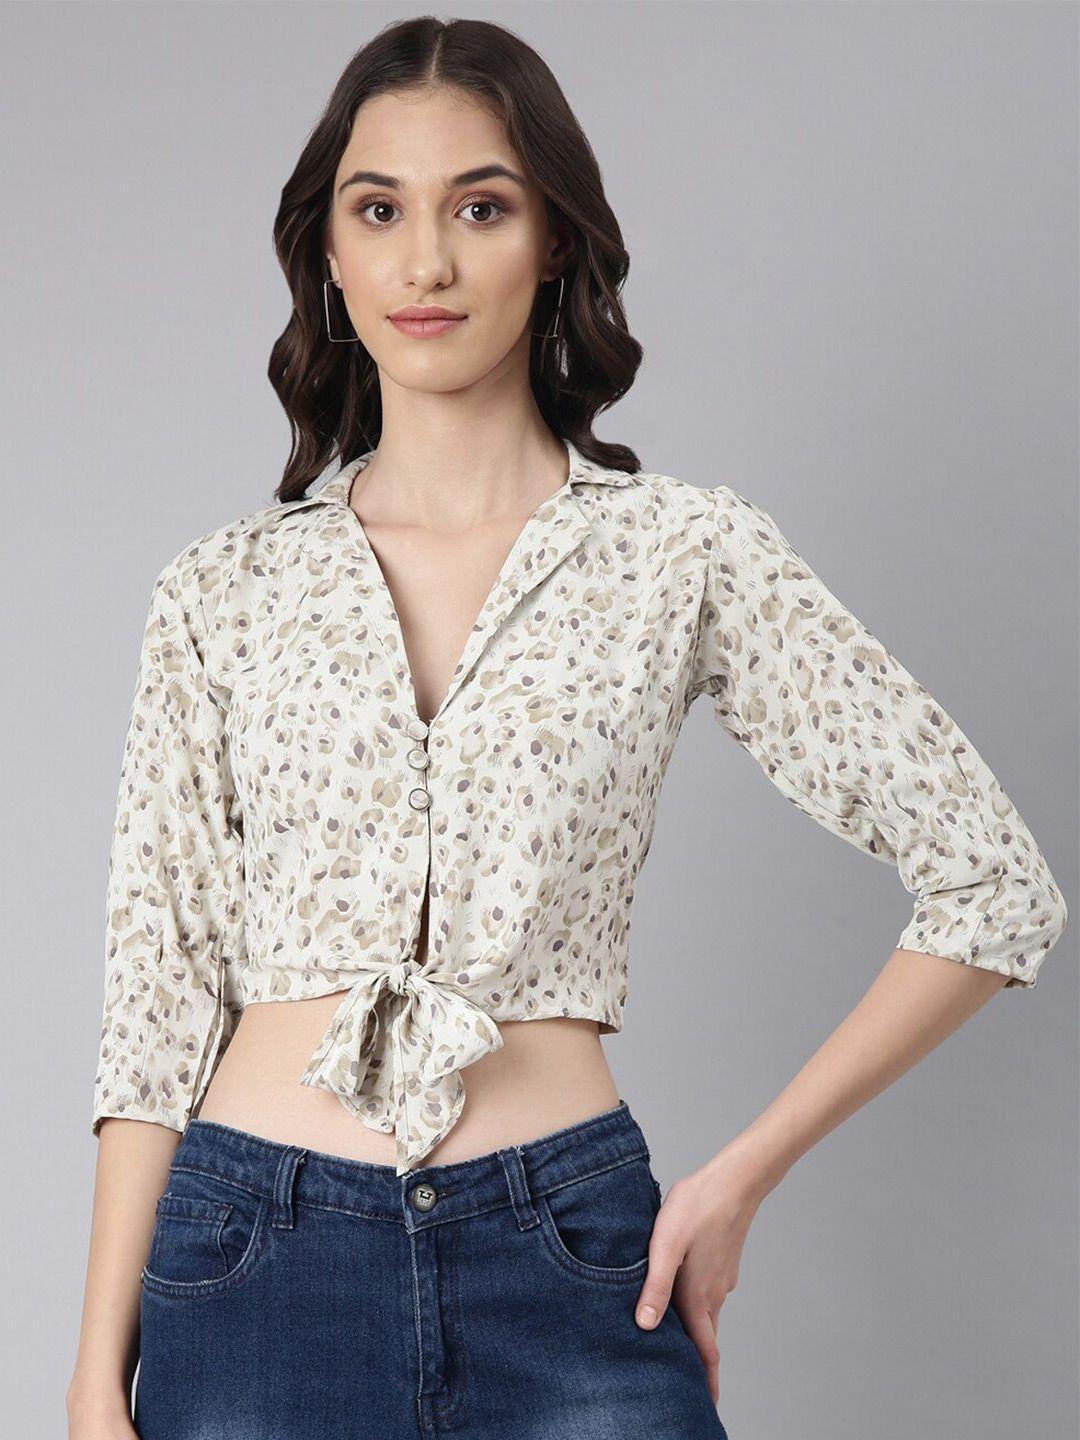 showoff abstract printed puffed sleeves tie-ups shirt style crop top